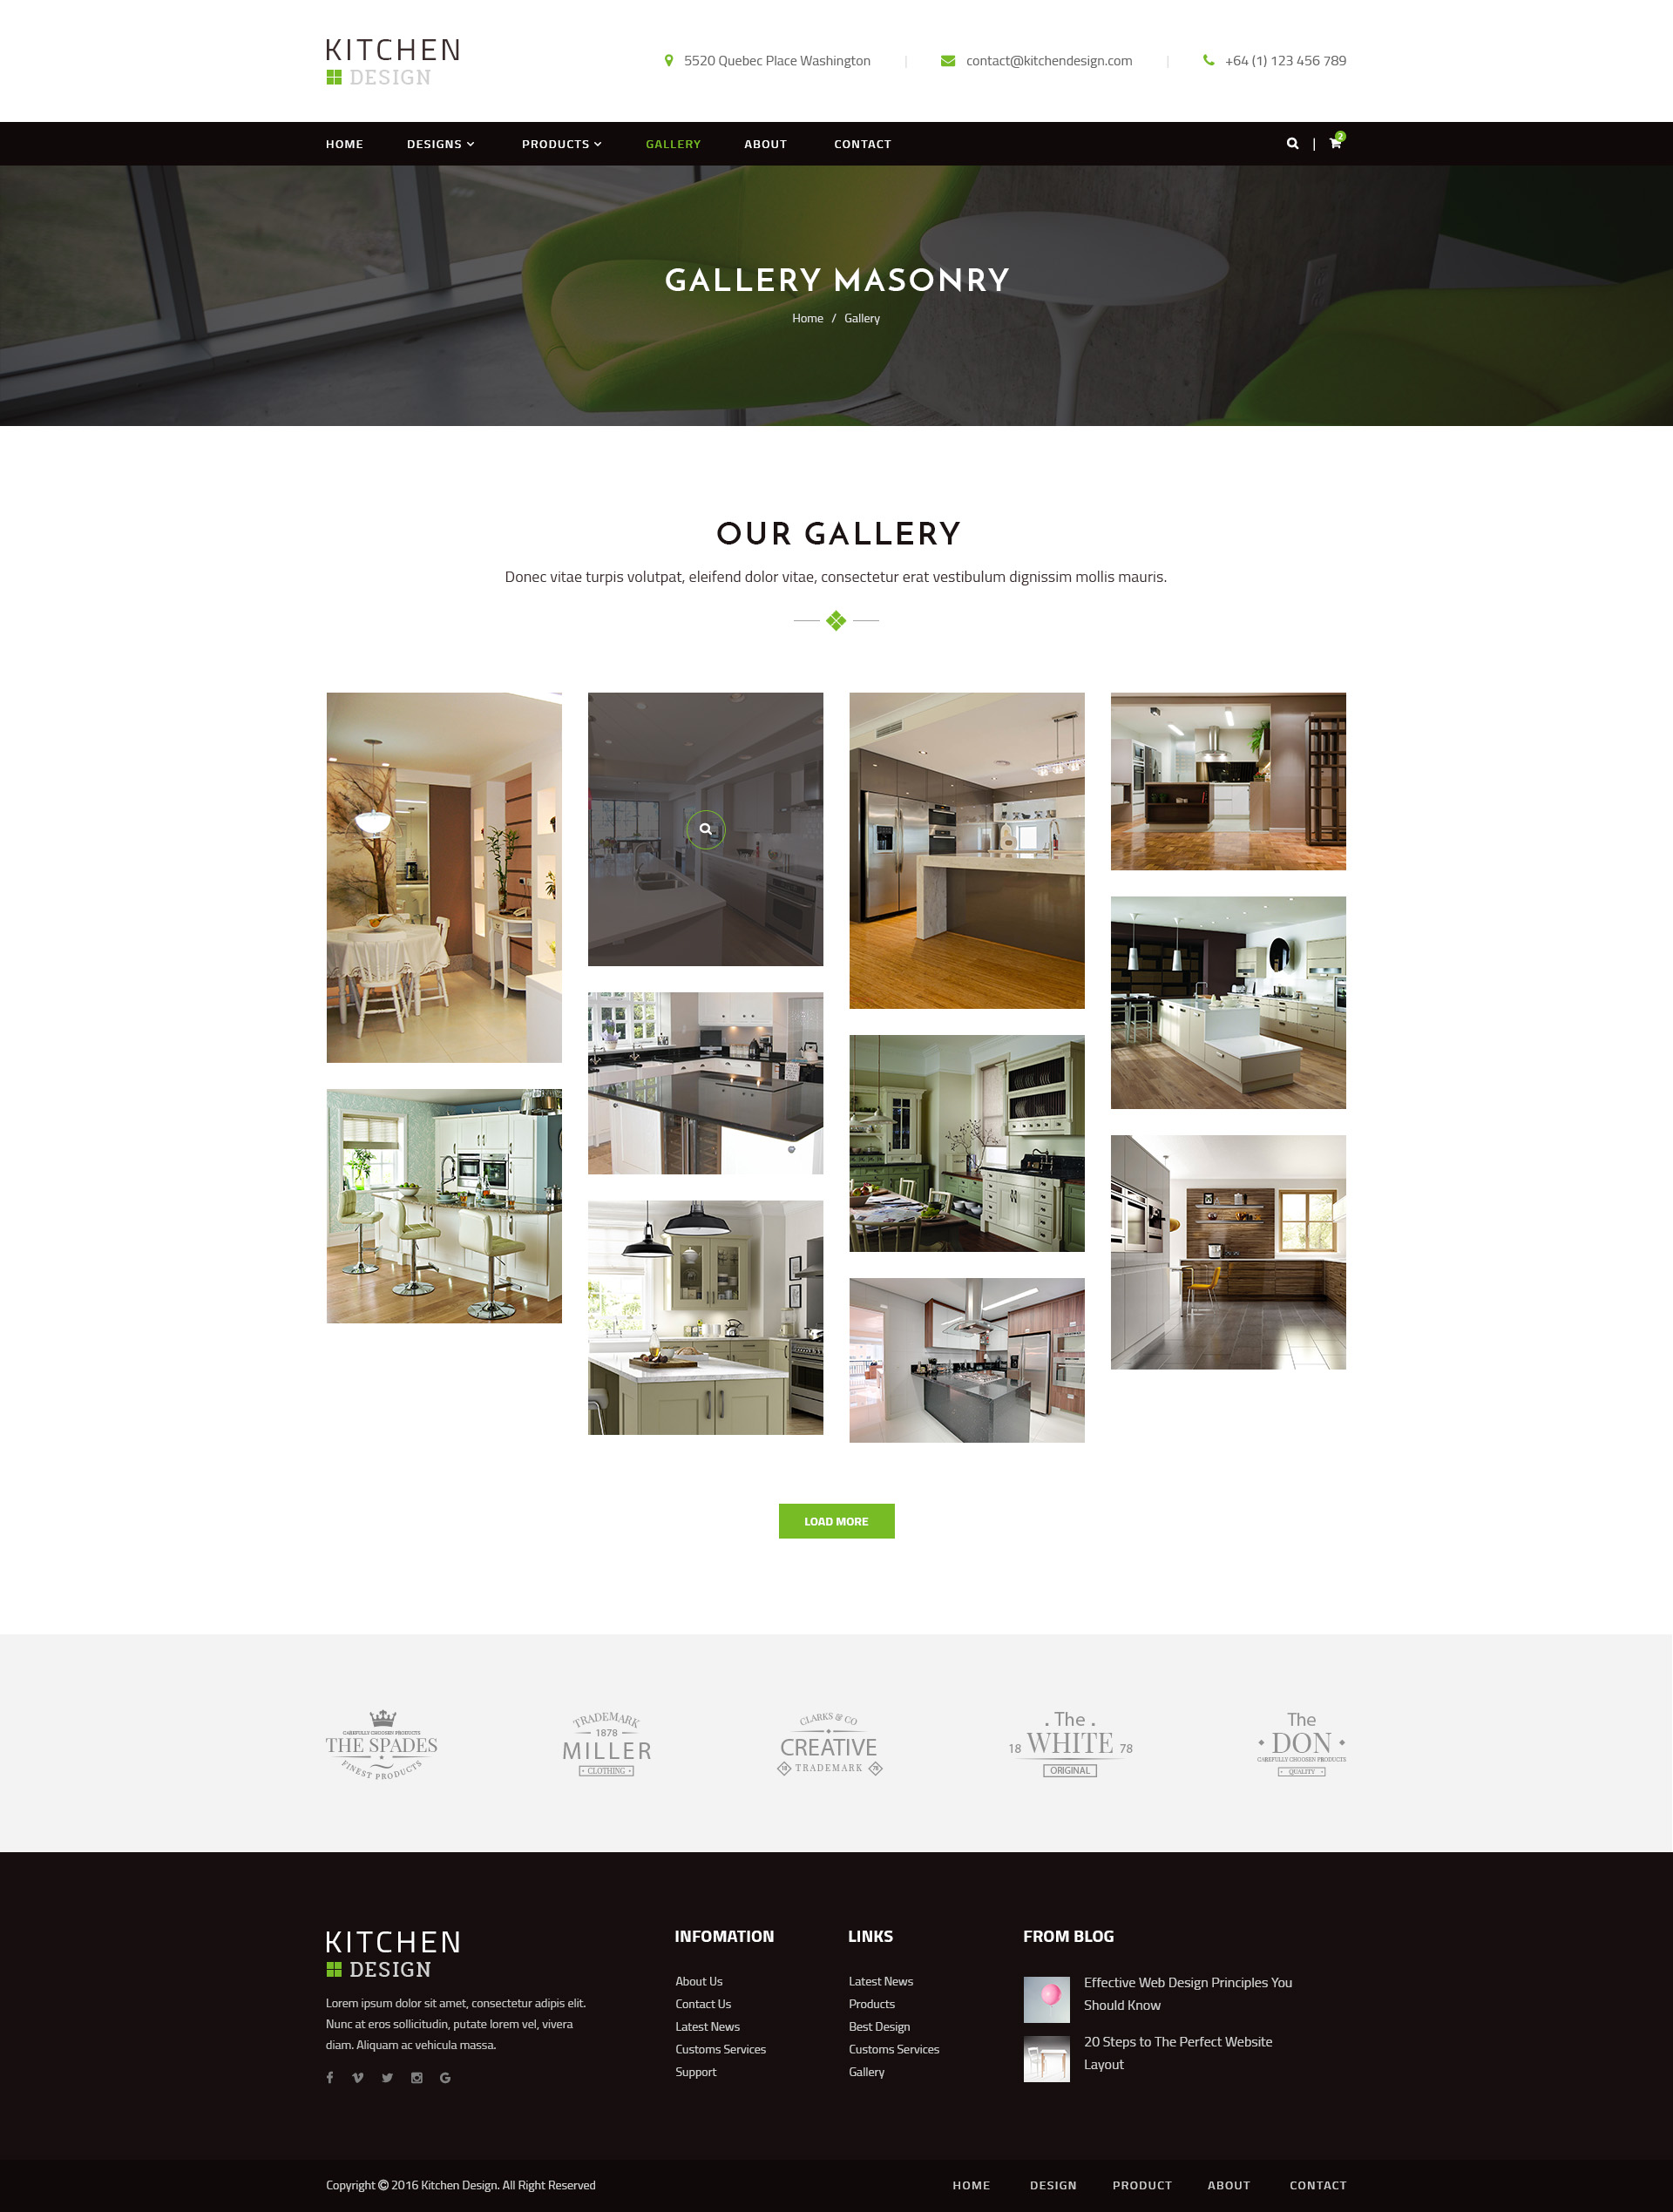 Kitchen - PSD Template by qtcmedia | ThemeForest  ... FILTER.jpg Kitchen_Preview/10_PRODUCTS DETAIL.jpg  Kitchen_Preview/11_SHOPPING CART.jpg Kitchen_Preview/12_CHECK OUT.jpg  Kitchen_Preview/13_BLOG GRID.jpg ...